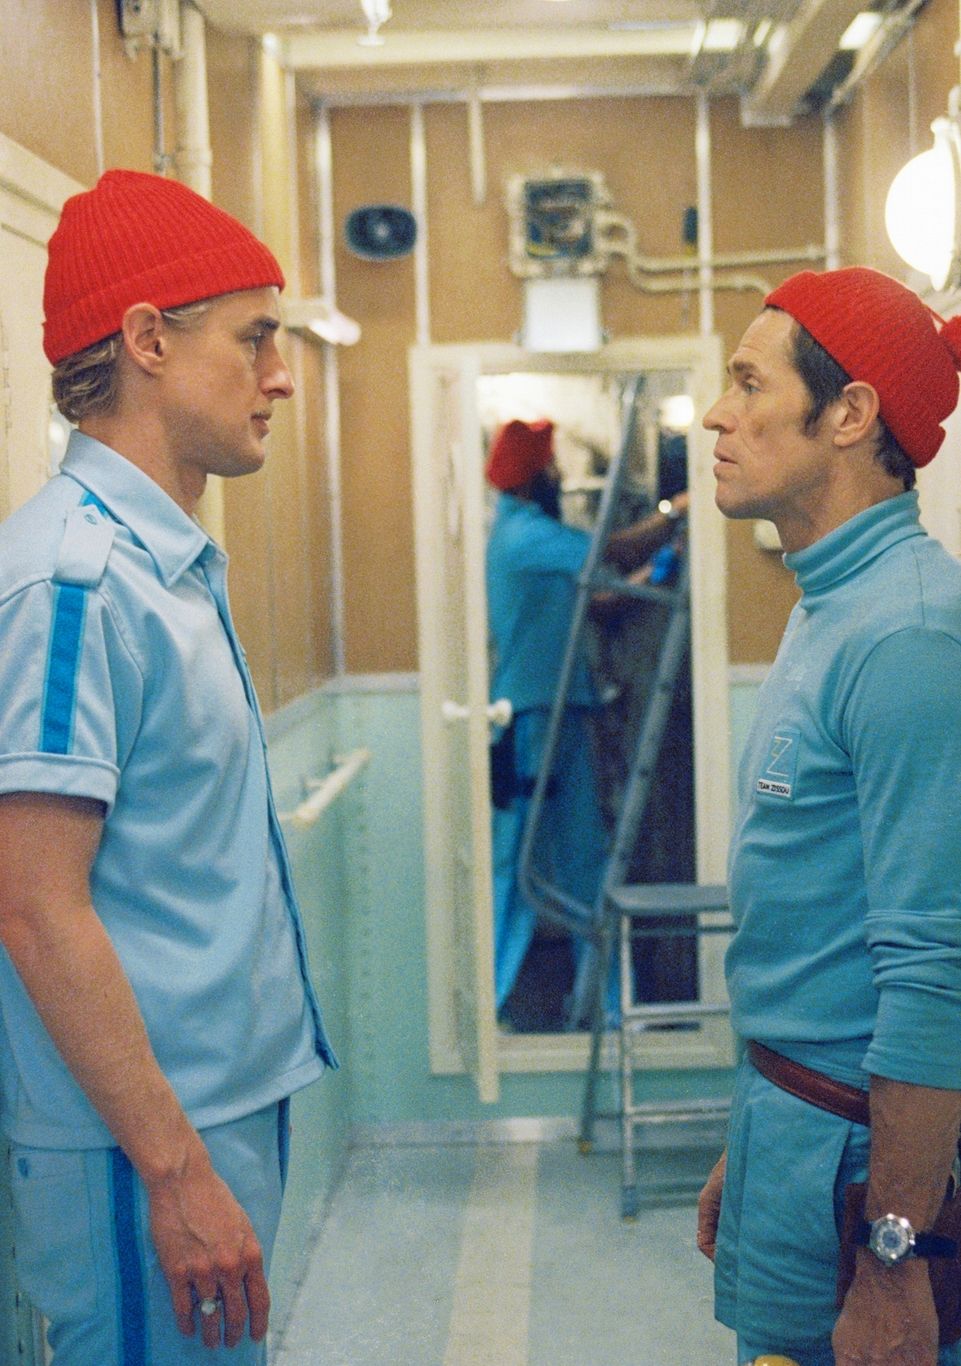 Two styles of red cap in Life Aquatic